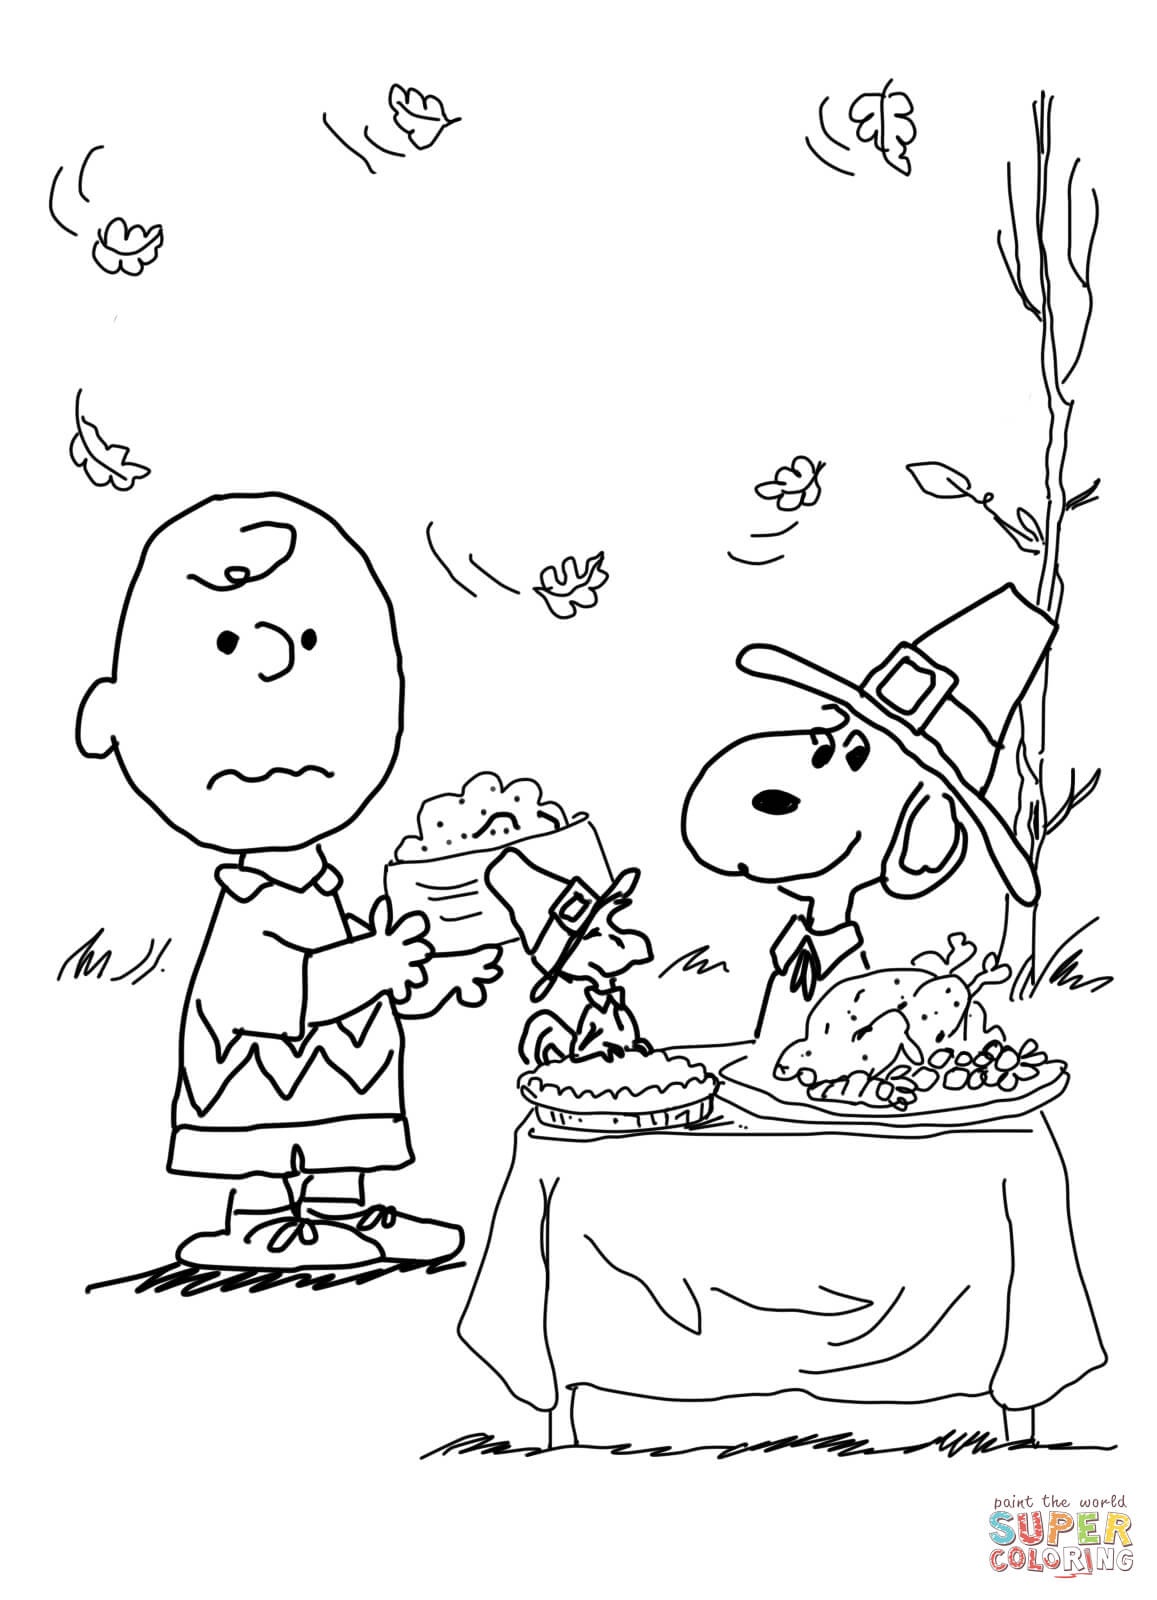 Charlie Brown Thanksgiving Coloring Page | Free Printable Coloring Pages - Free Printable Coloring Sheets Thanksgiving